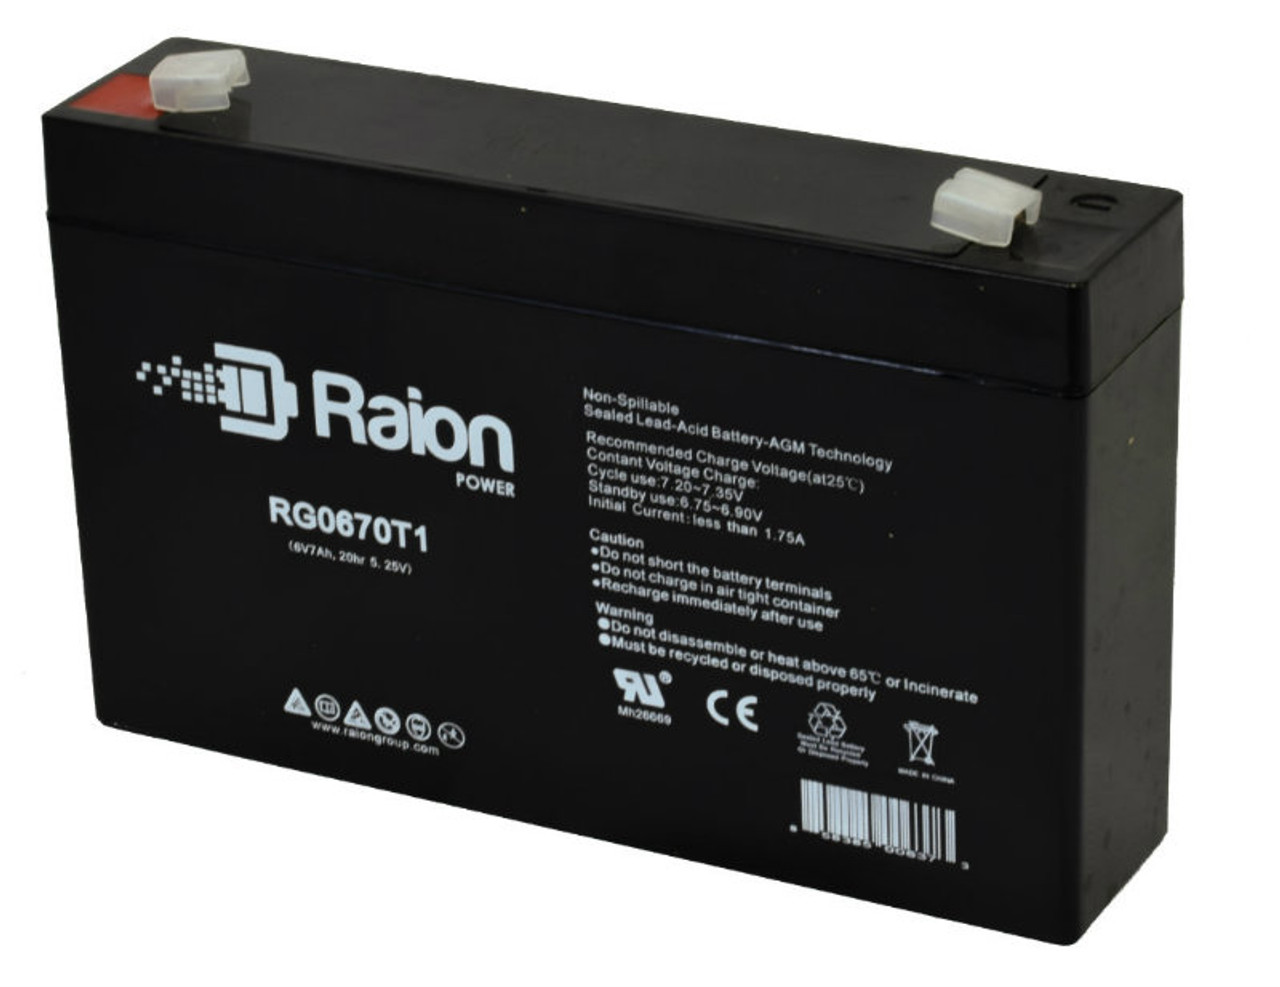 Raion Power RG0670T1 6V 7Ah Replacement Battery Cartridge for Cavitron 52100800/052100800 Medical Equipment